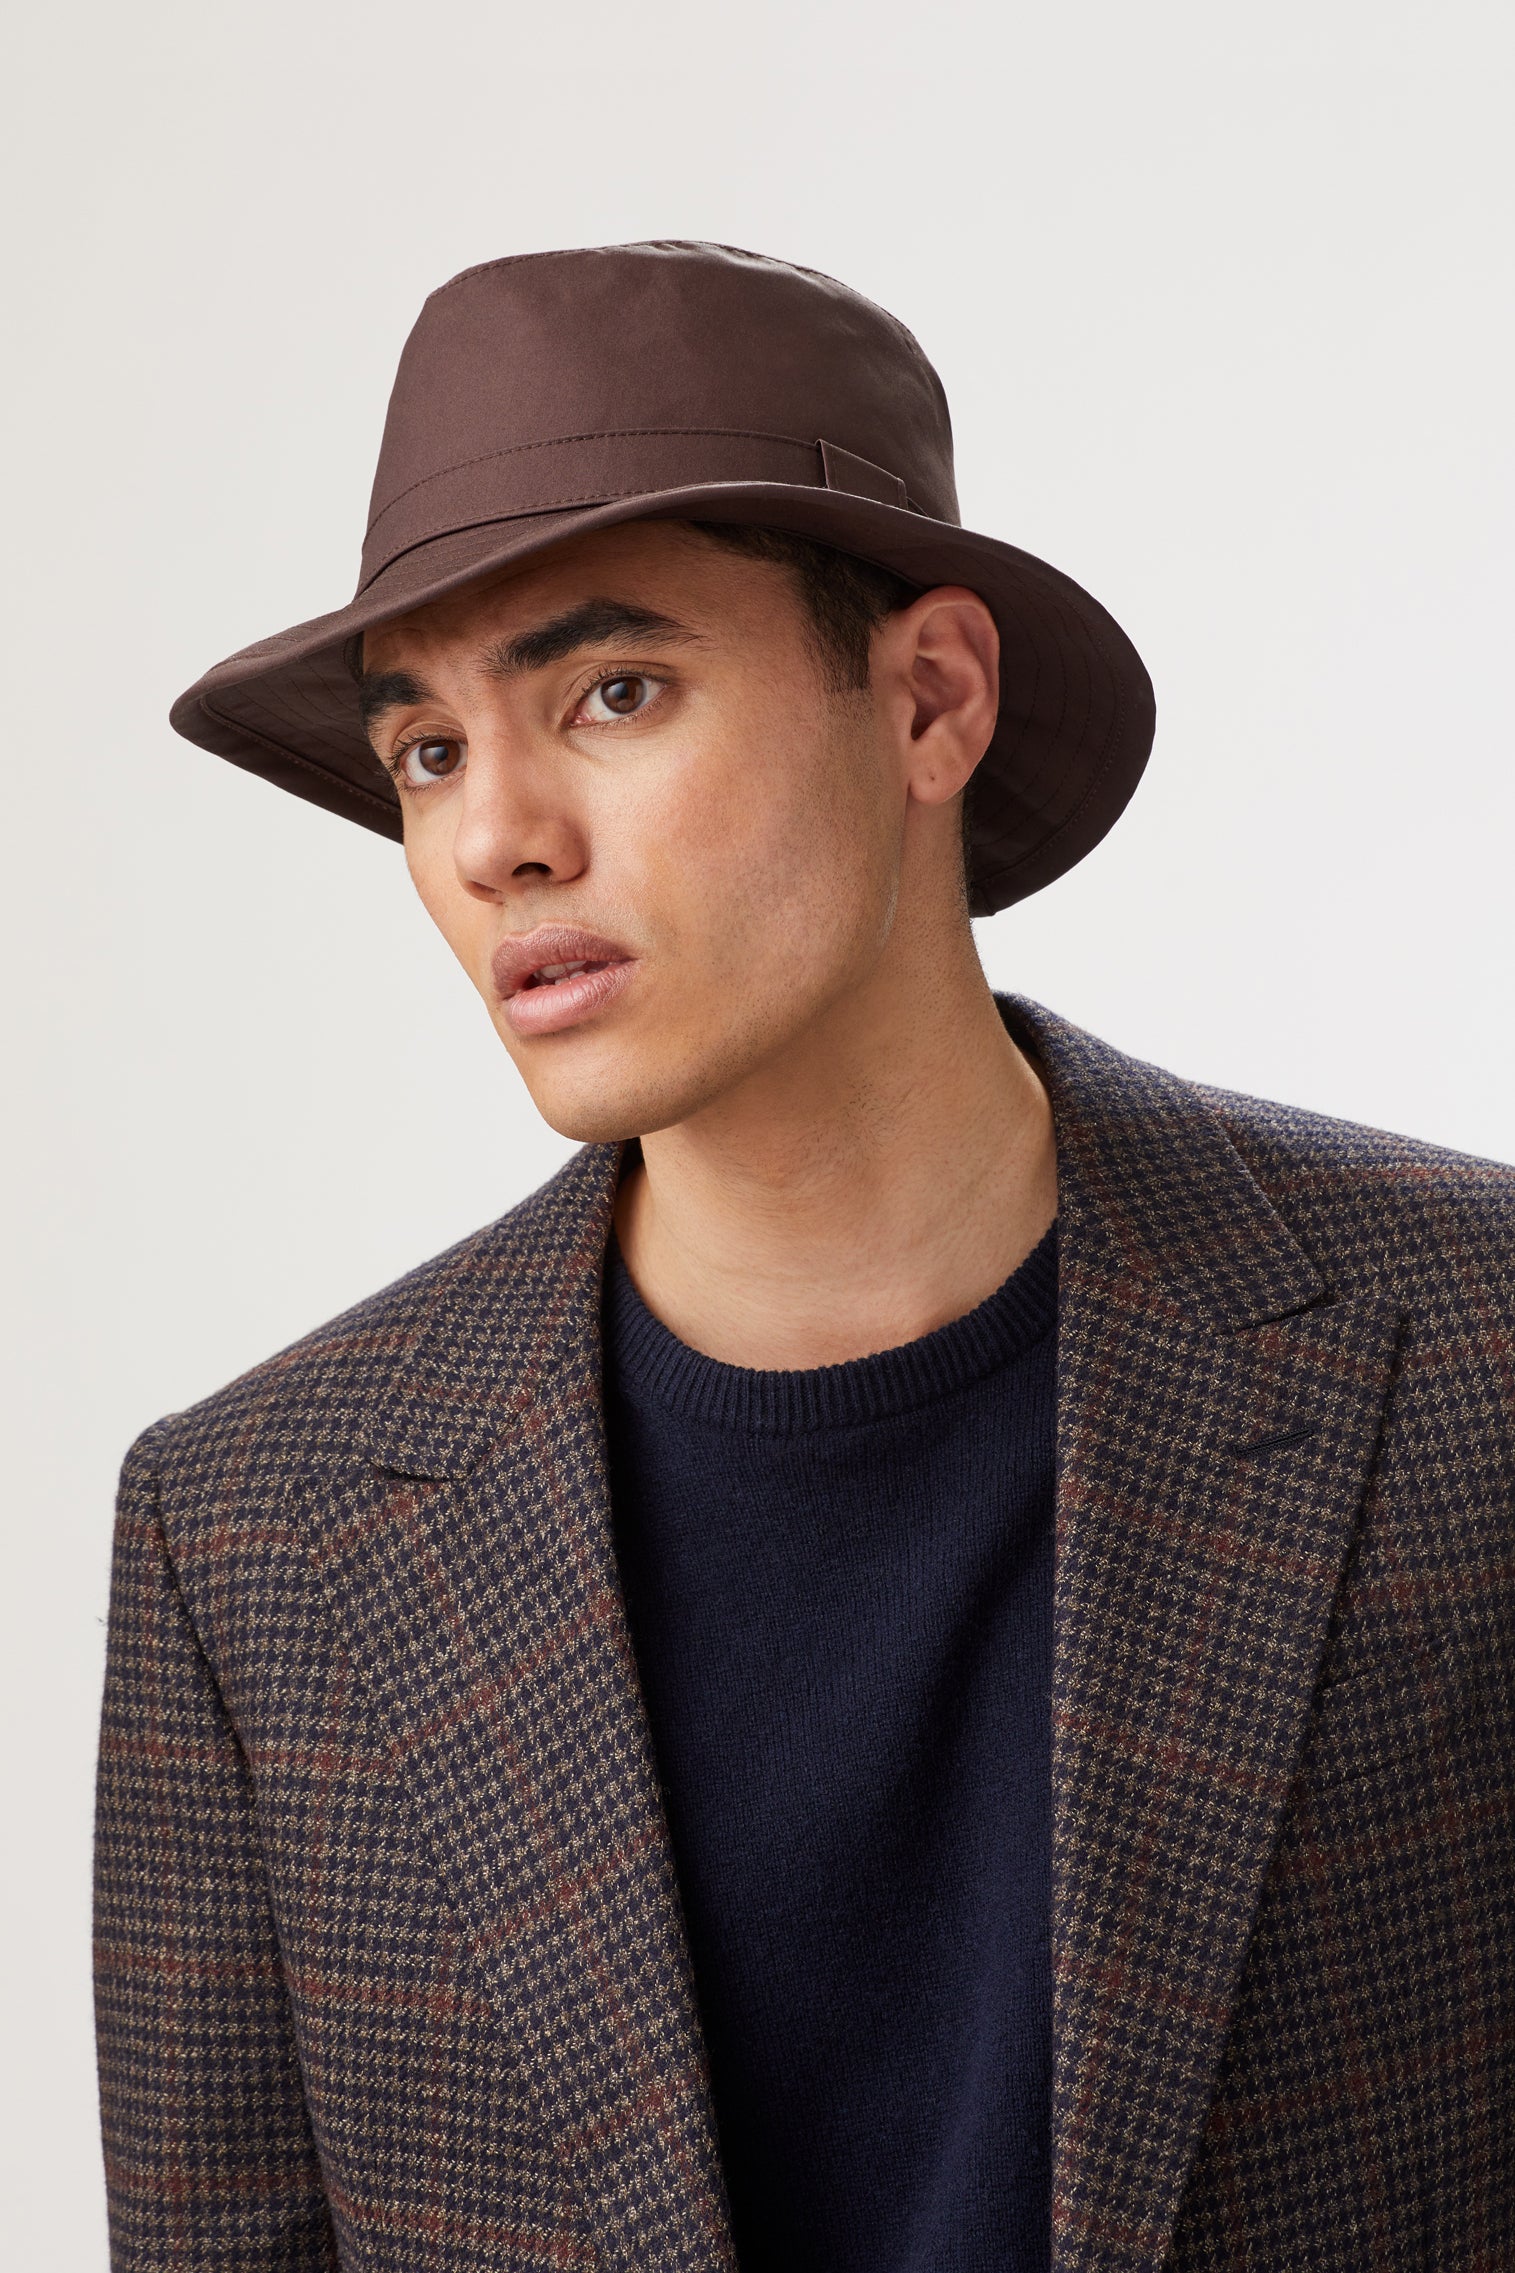 Tay GORE-TEX Hat - Hats for Tall People - Lock & Co. Hatters London UK